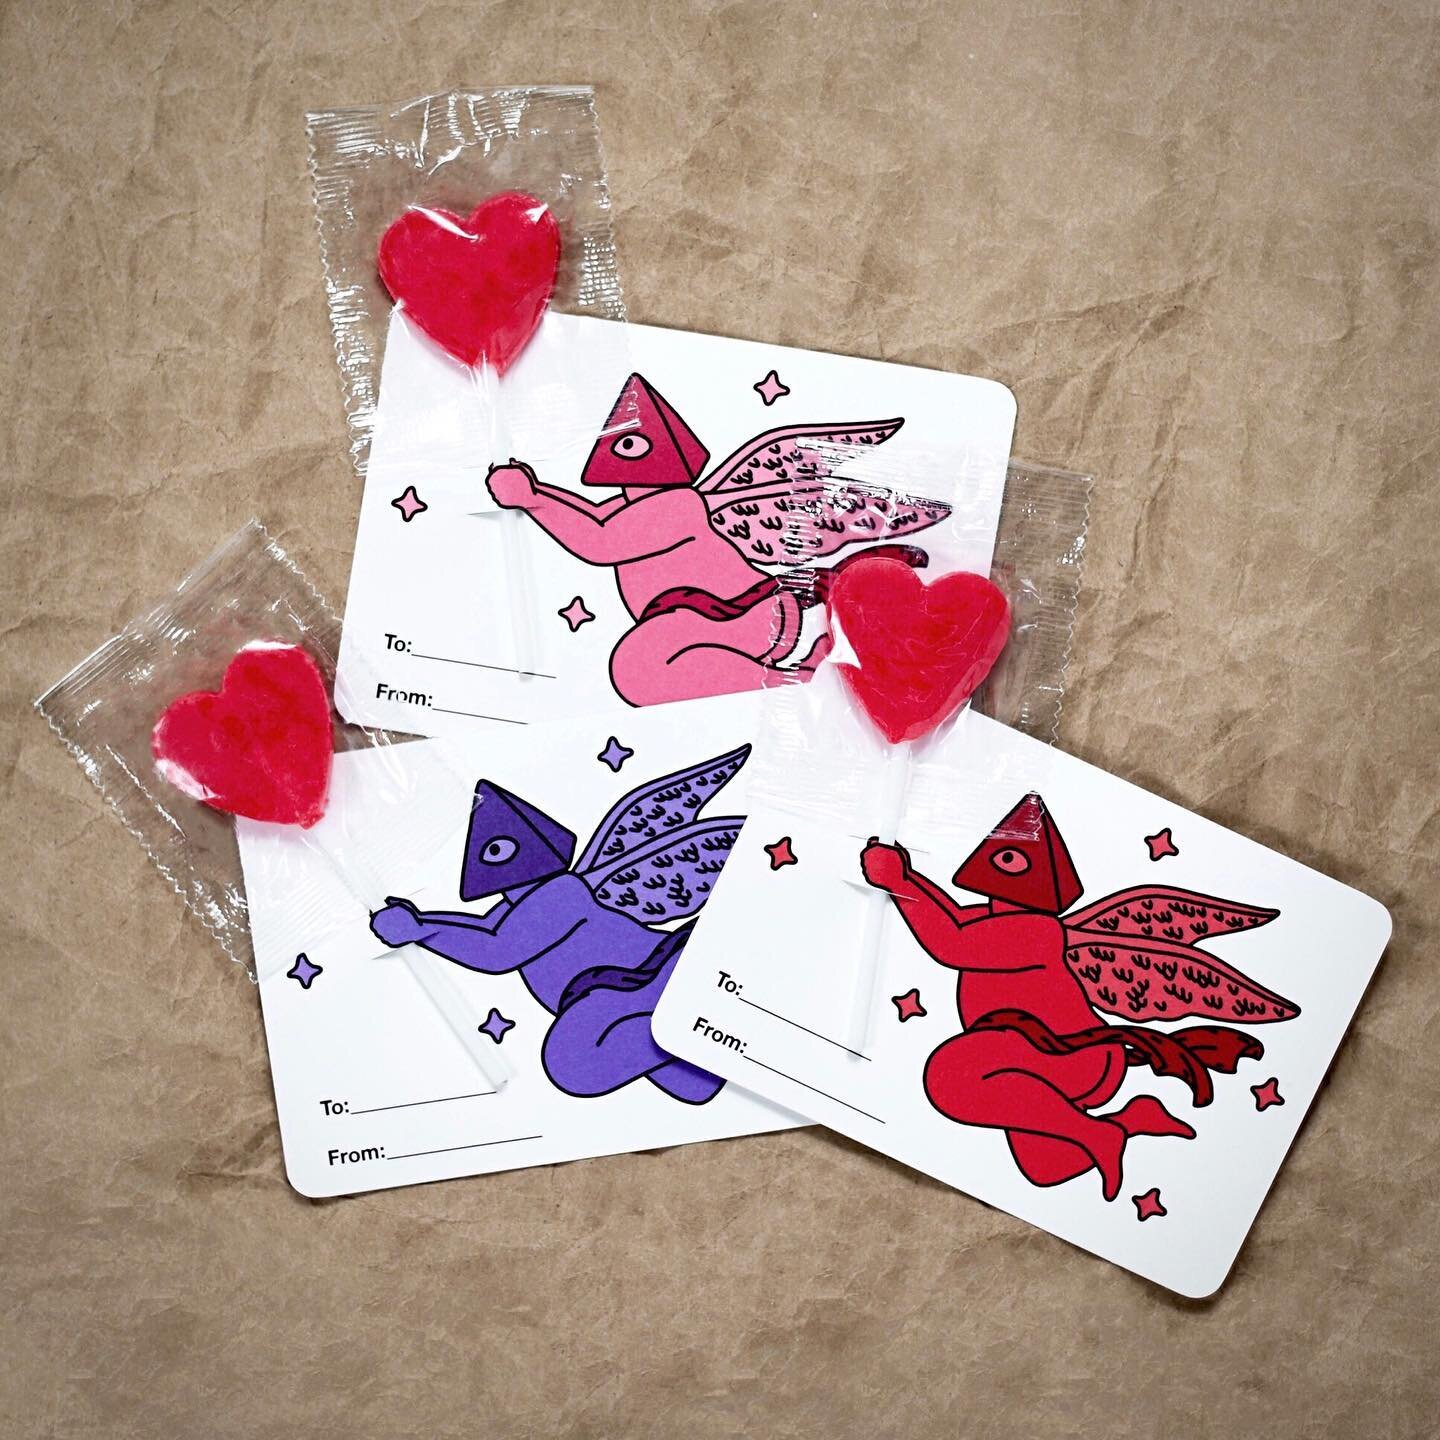 Now available for your last minute Valentine's Day shopping!! We just stocked our online store with this limited-edition Cherub Stationary Set, available in a set of 3! Each card arrives pre-cut with lollipop inserts and features a festive message + 